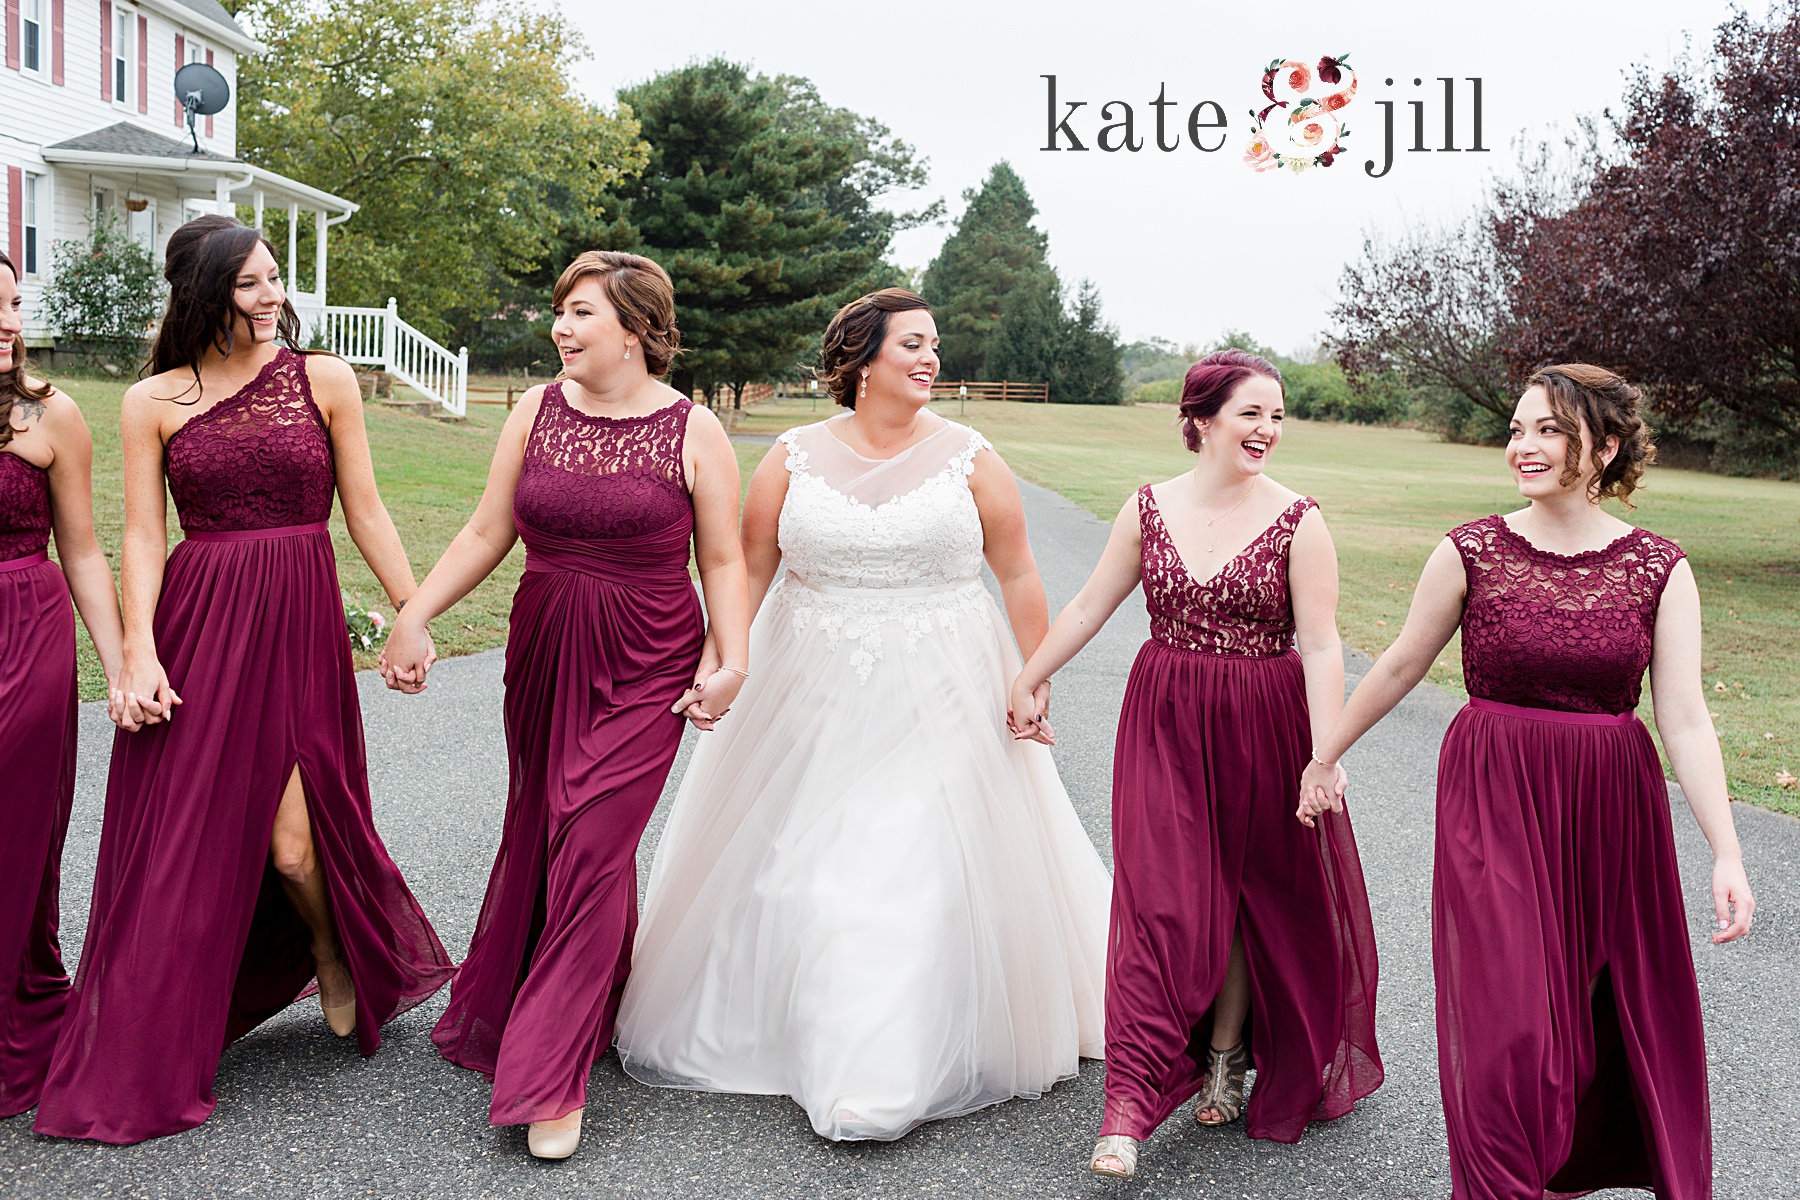 bridesmaids walking together on path